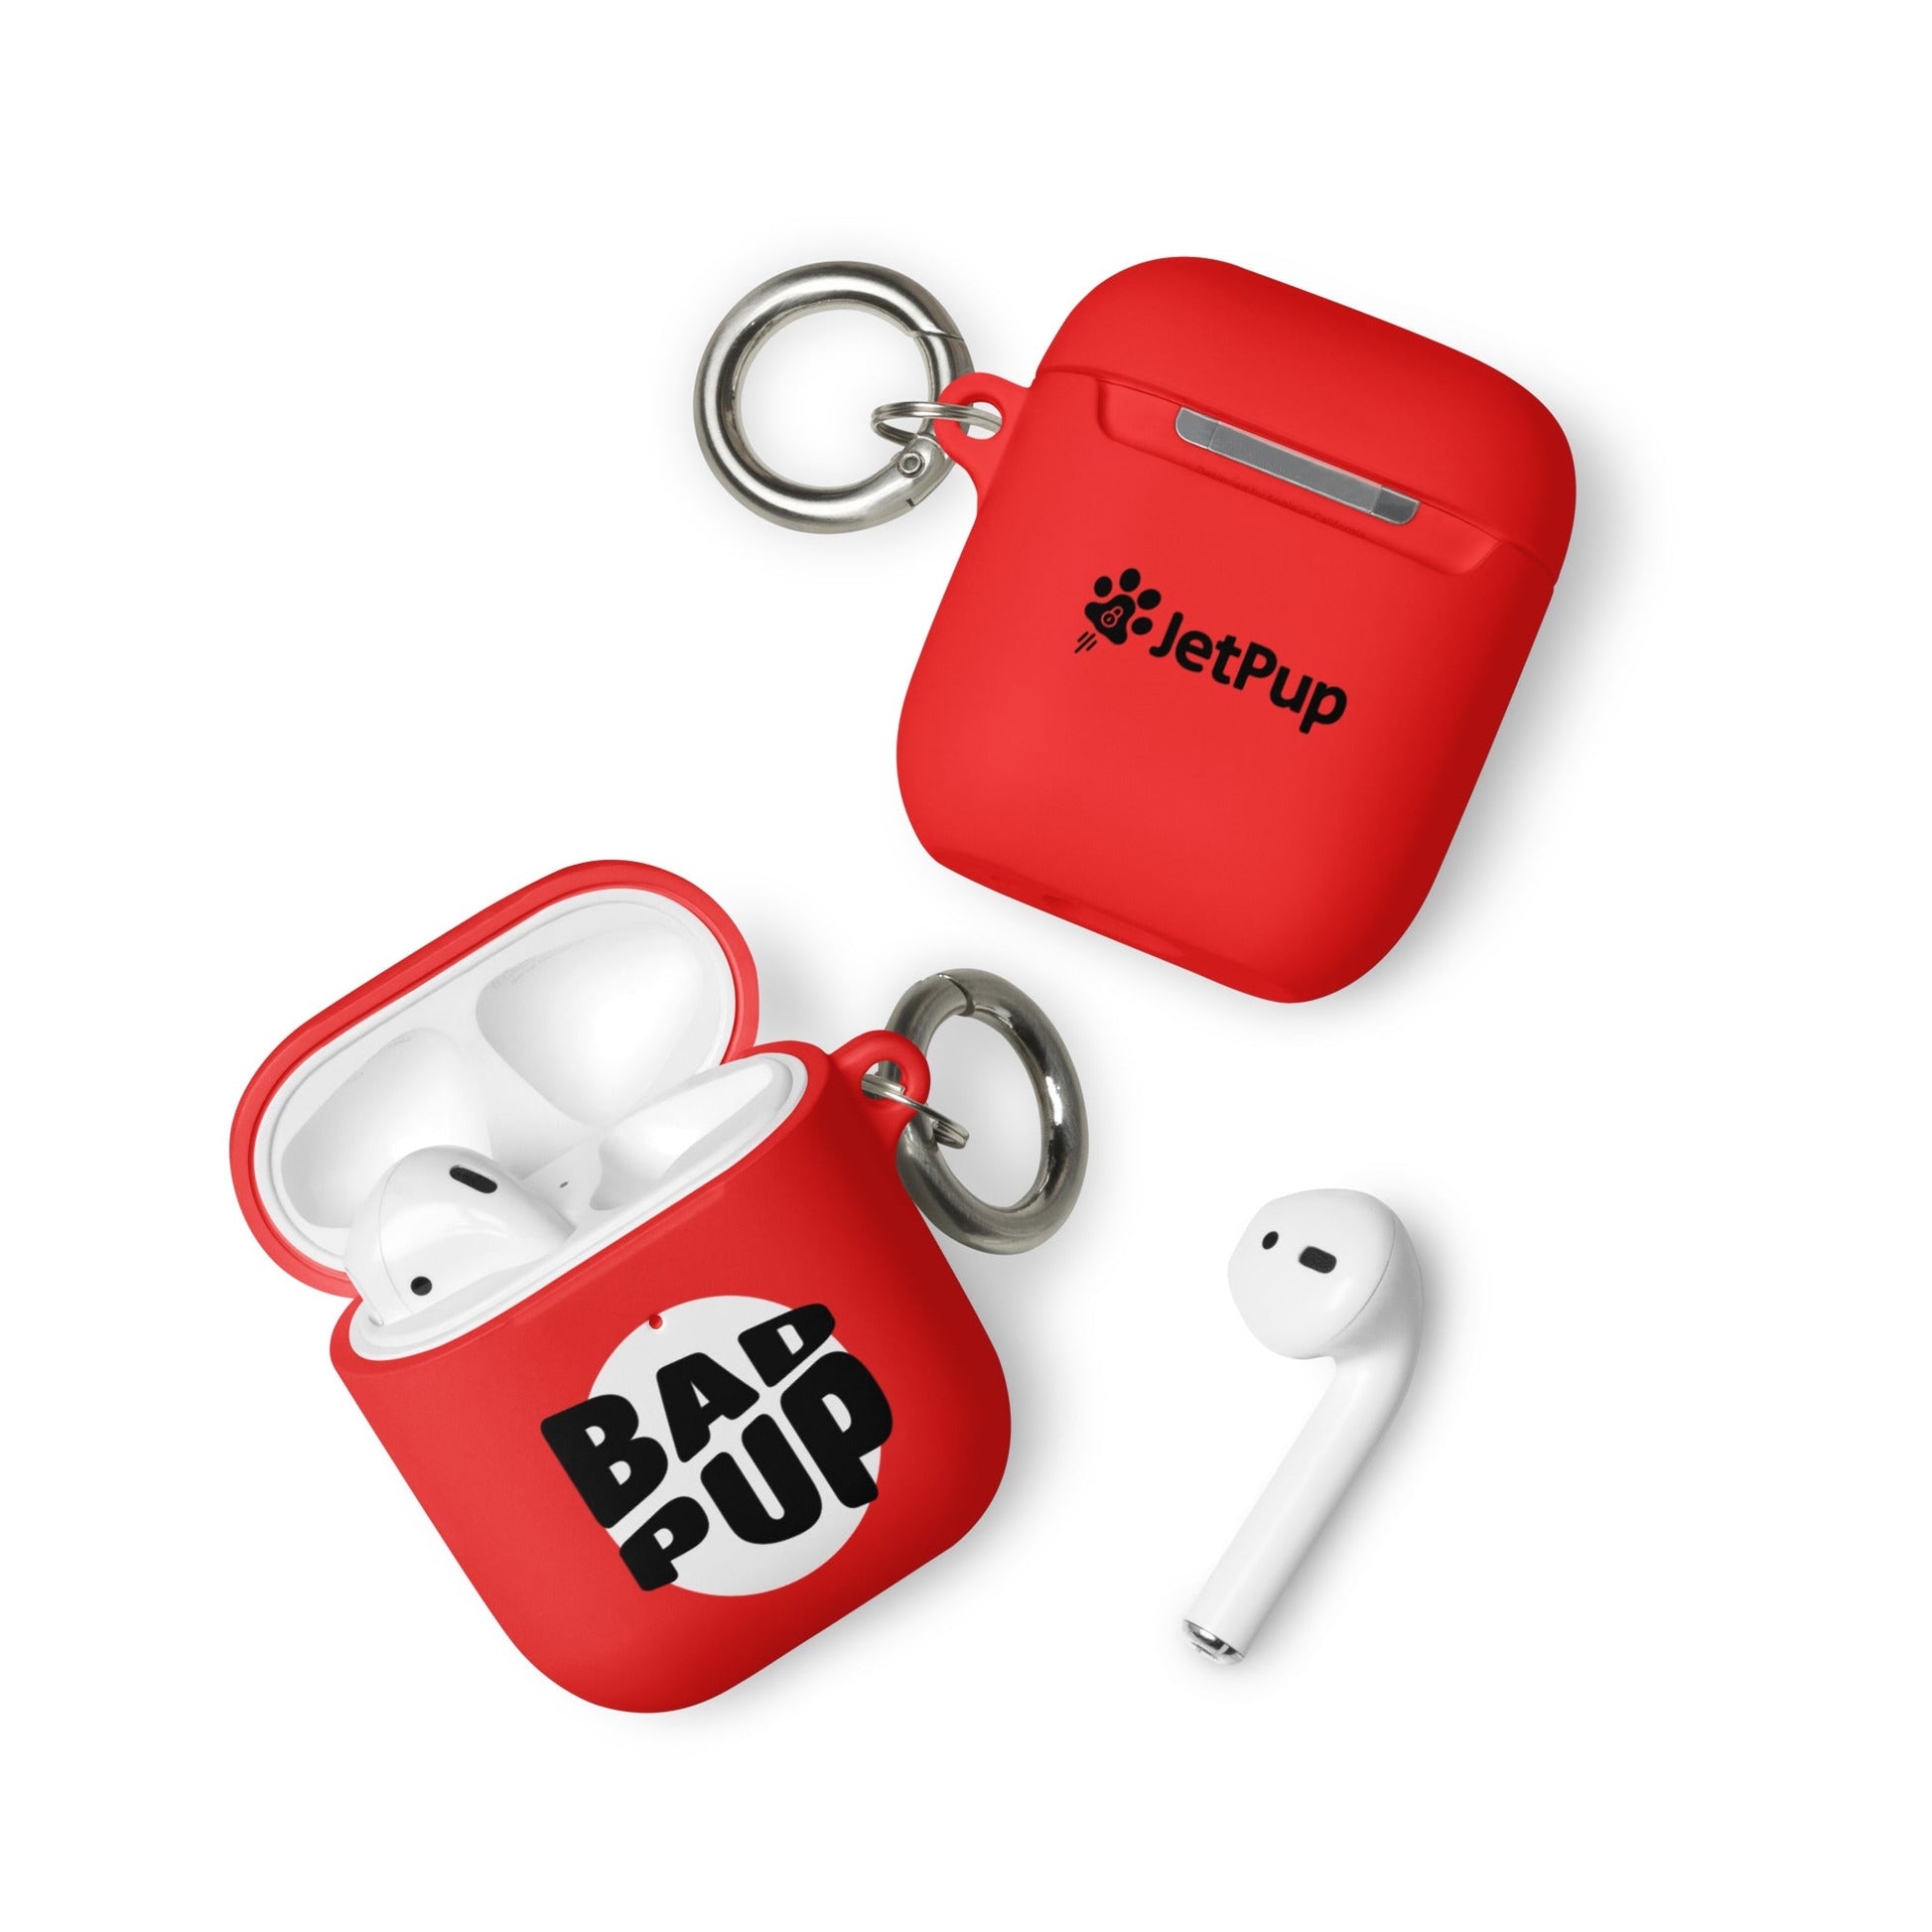 Bad Pup AirPods Case - Red - JetPup